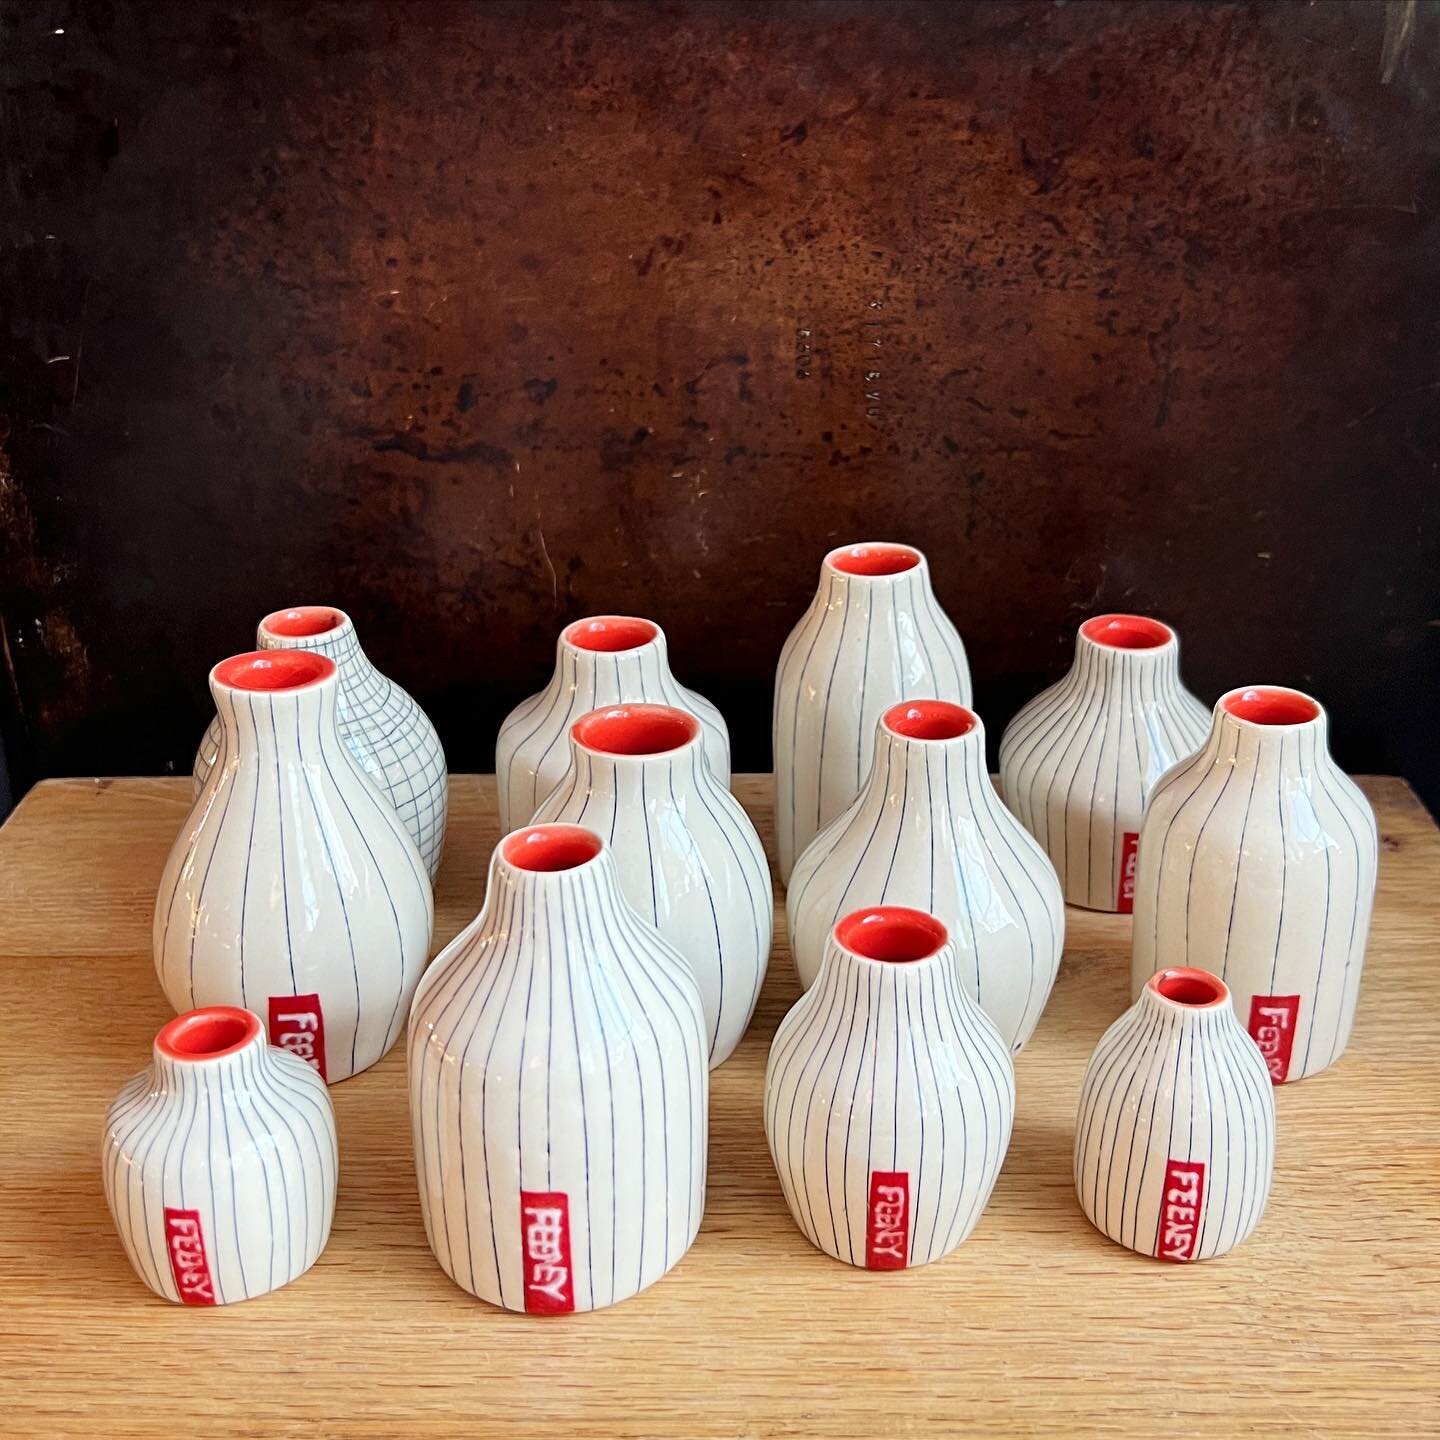 What is a group of vases called? A herd? A gathering? A clutch?

#vase #mishima #ceramics #miniatures